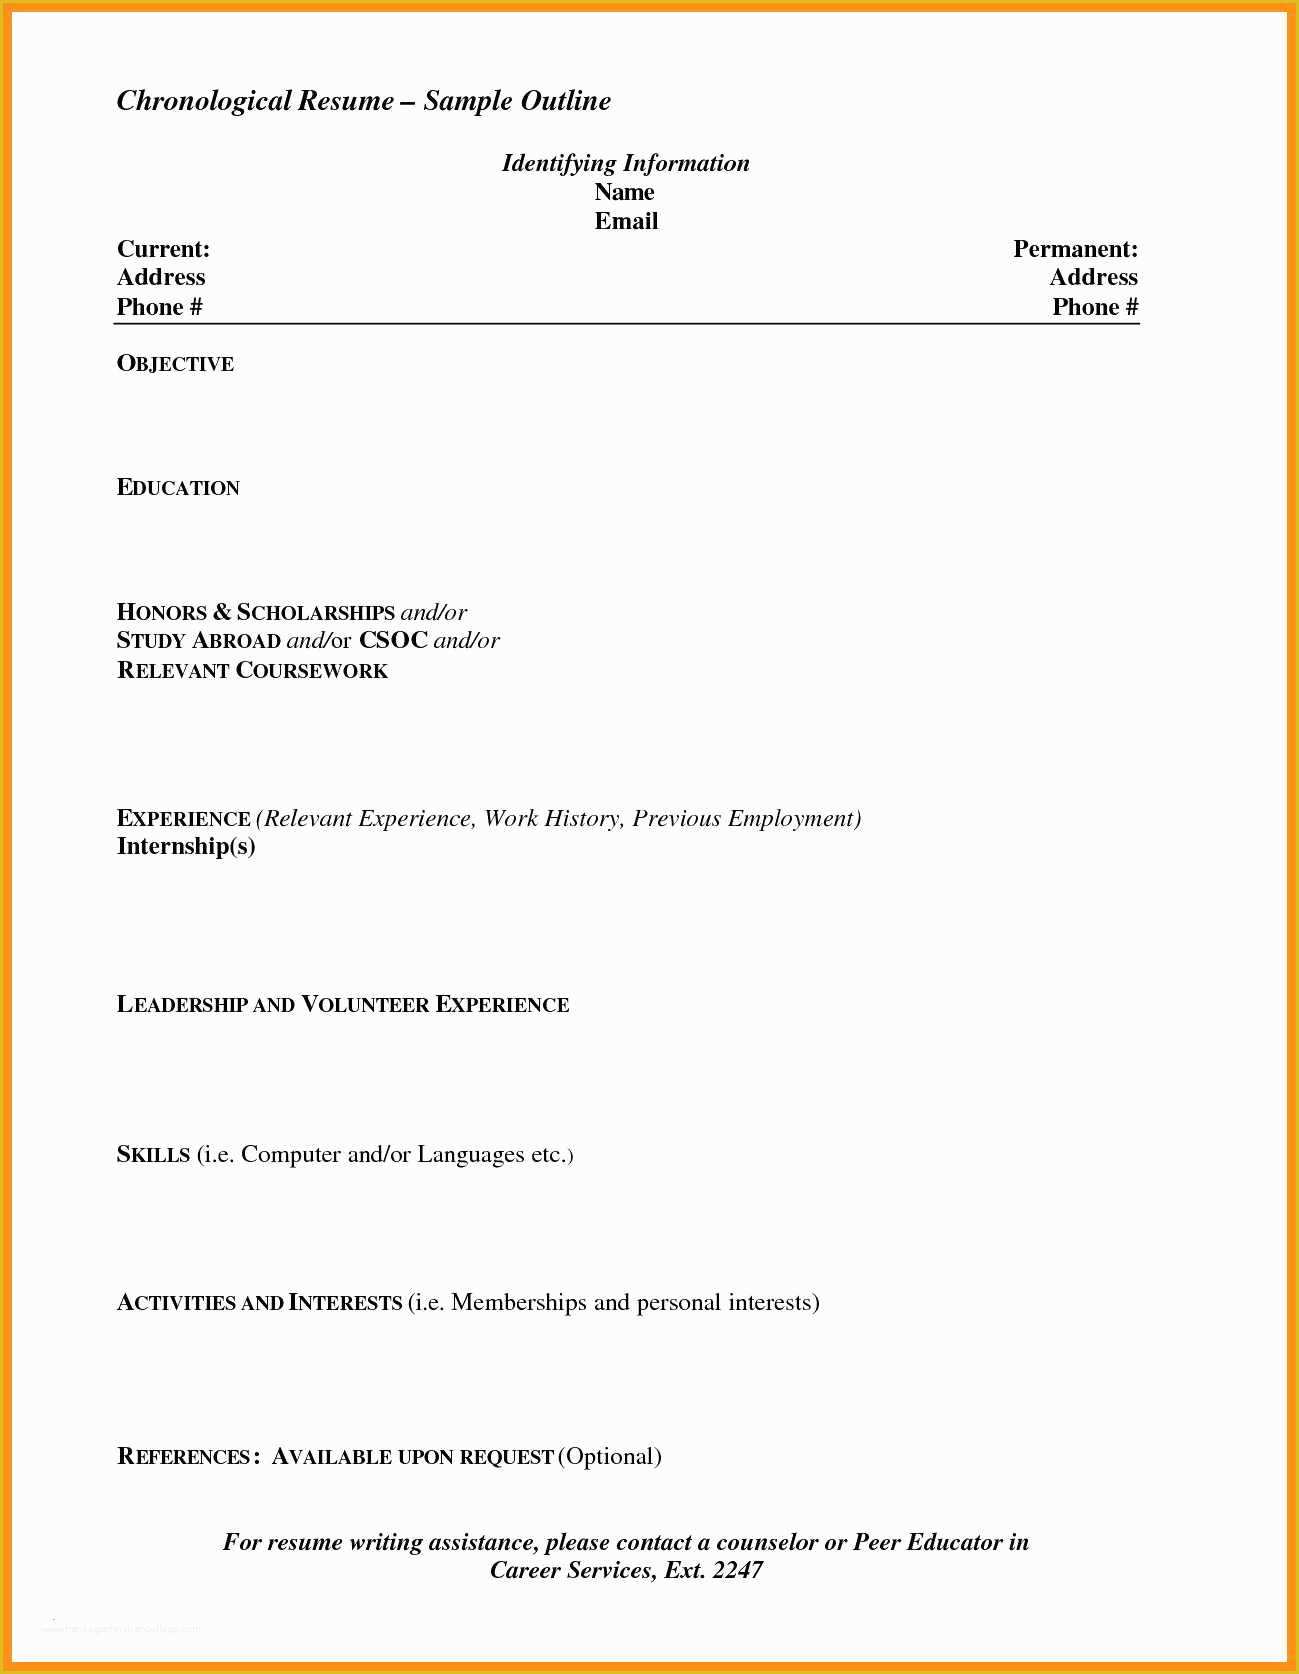 Free Resume Templates that are Actually Free Of Resume and Template Really Free Resume Templates Sample